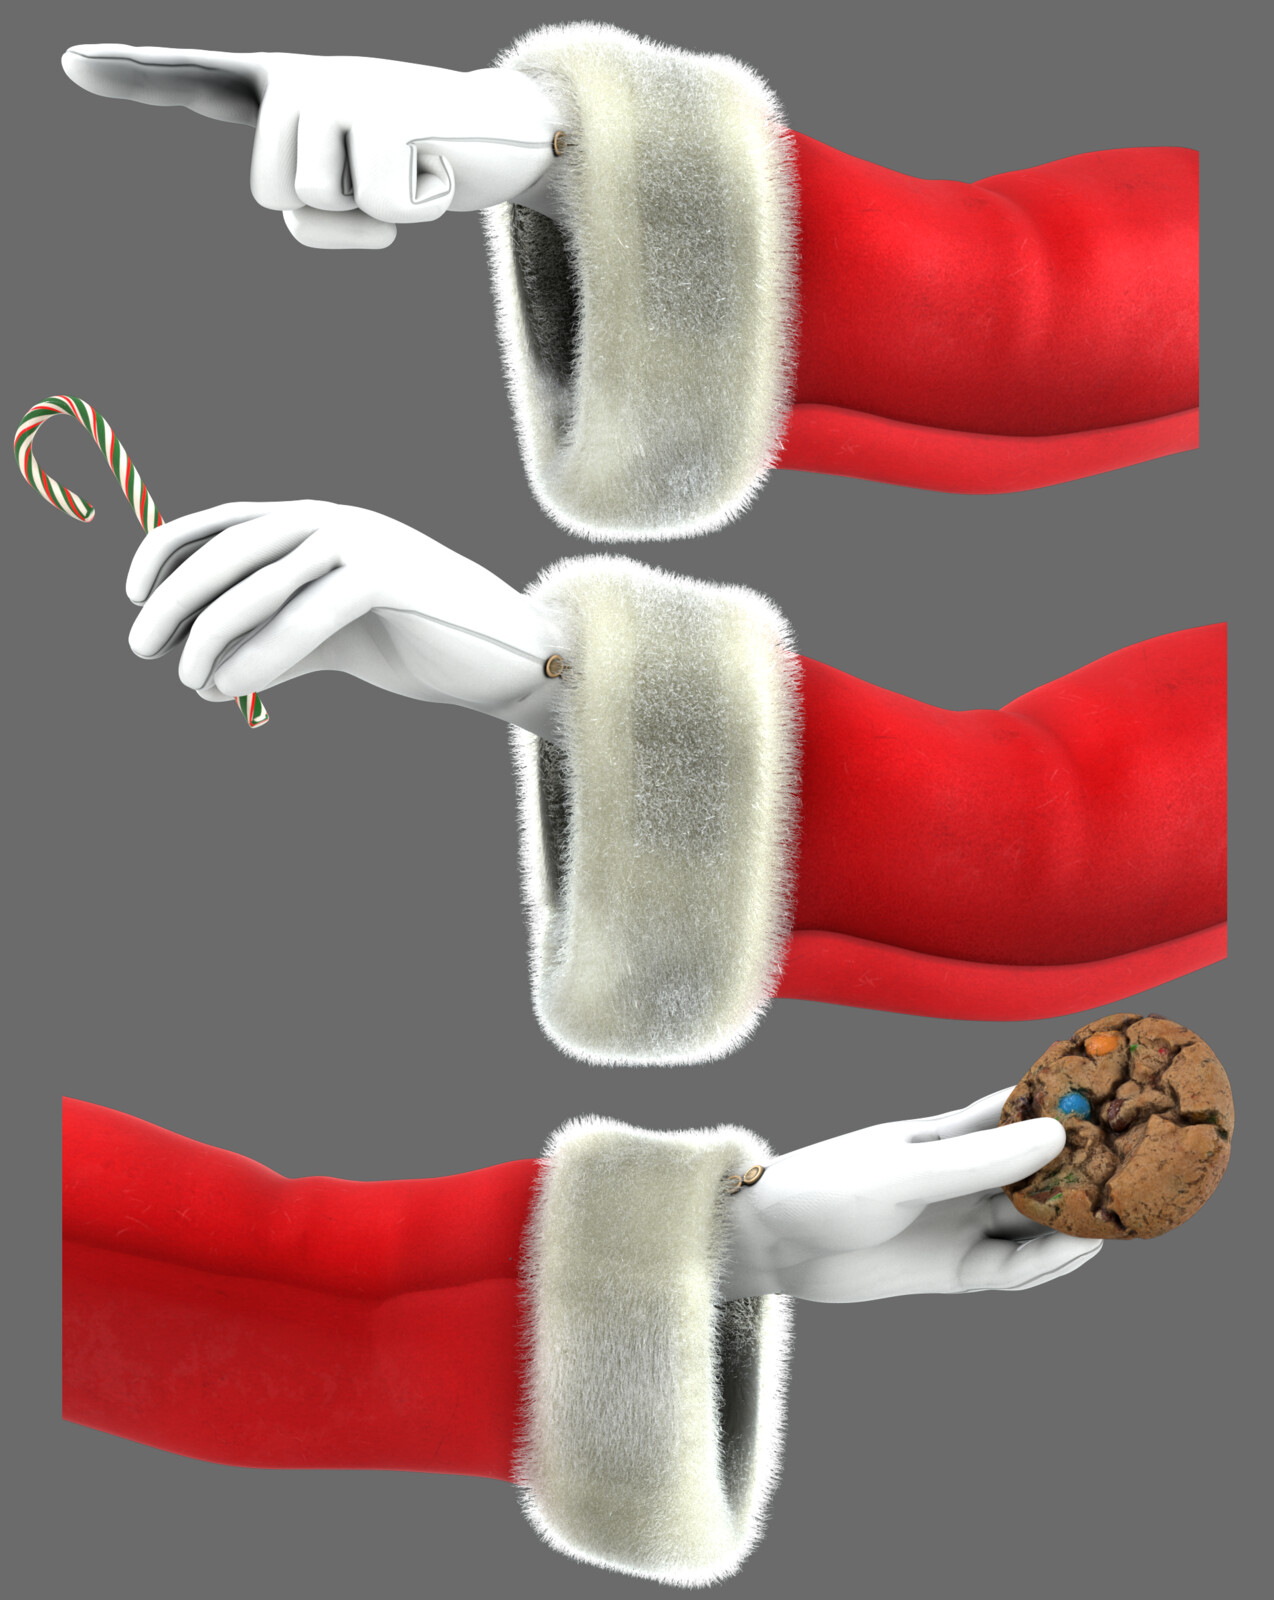 Responsible for modeling, texturing, and groom on sleeve and hand and candy cane.  Rigged with Advanced Skeleton.  Cookie model and textures from Quixel.